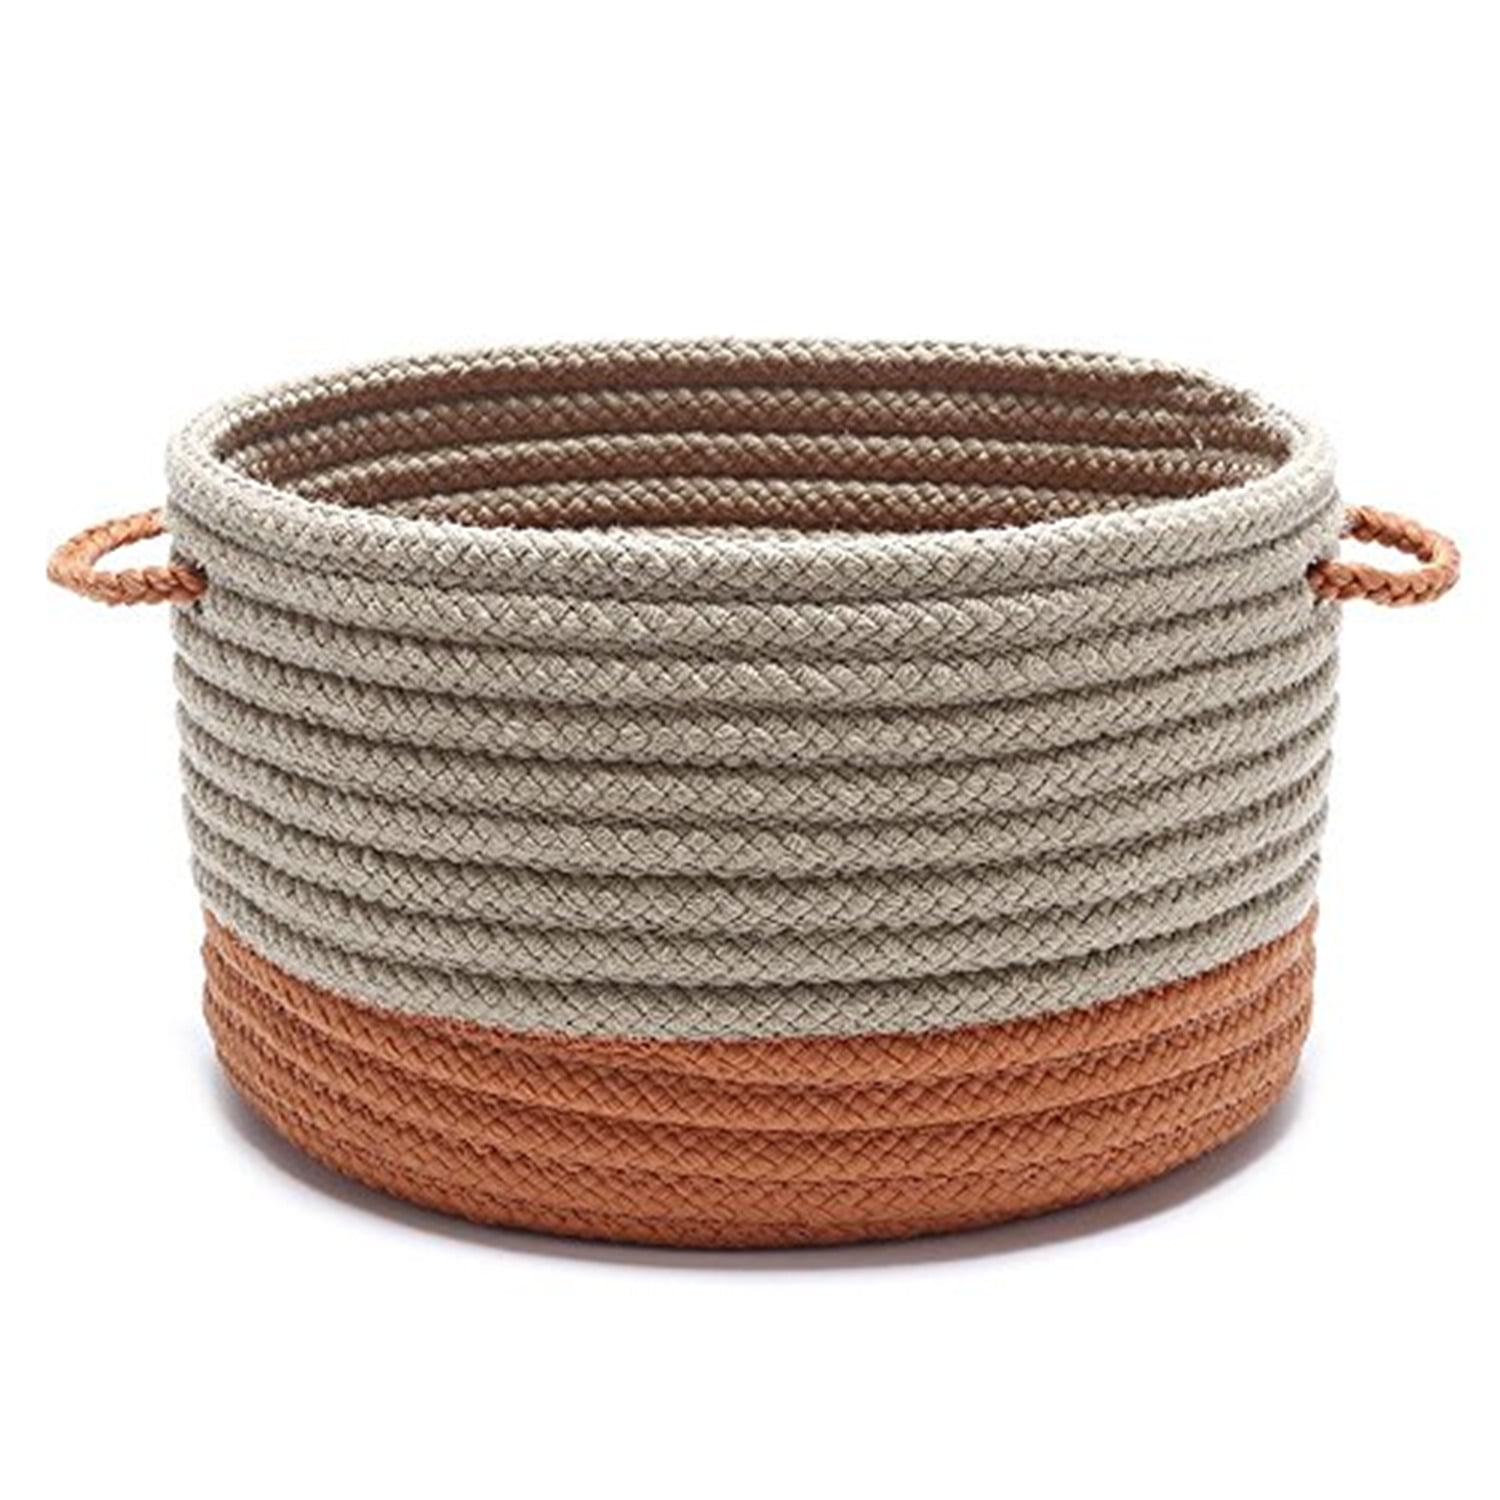 Picture of Colonial Mills IN41A017X010 17 x 17 x 10 in. Marina Round Basket, Orange & N150